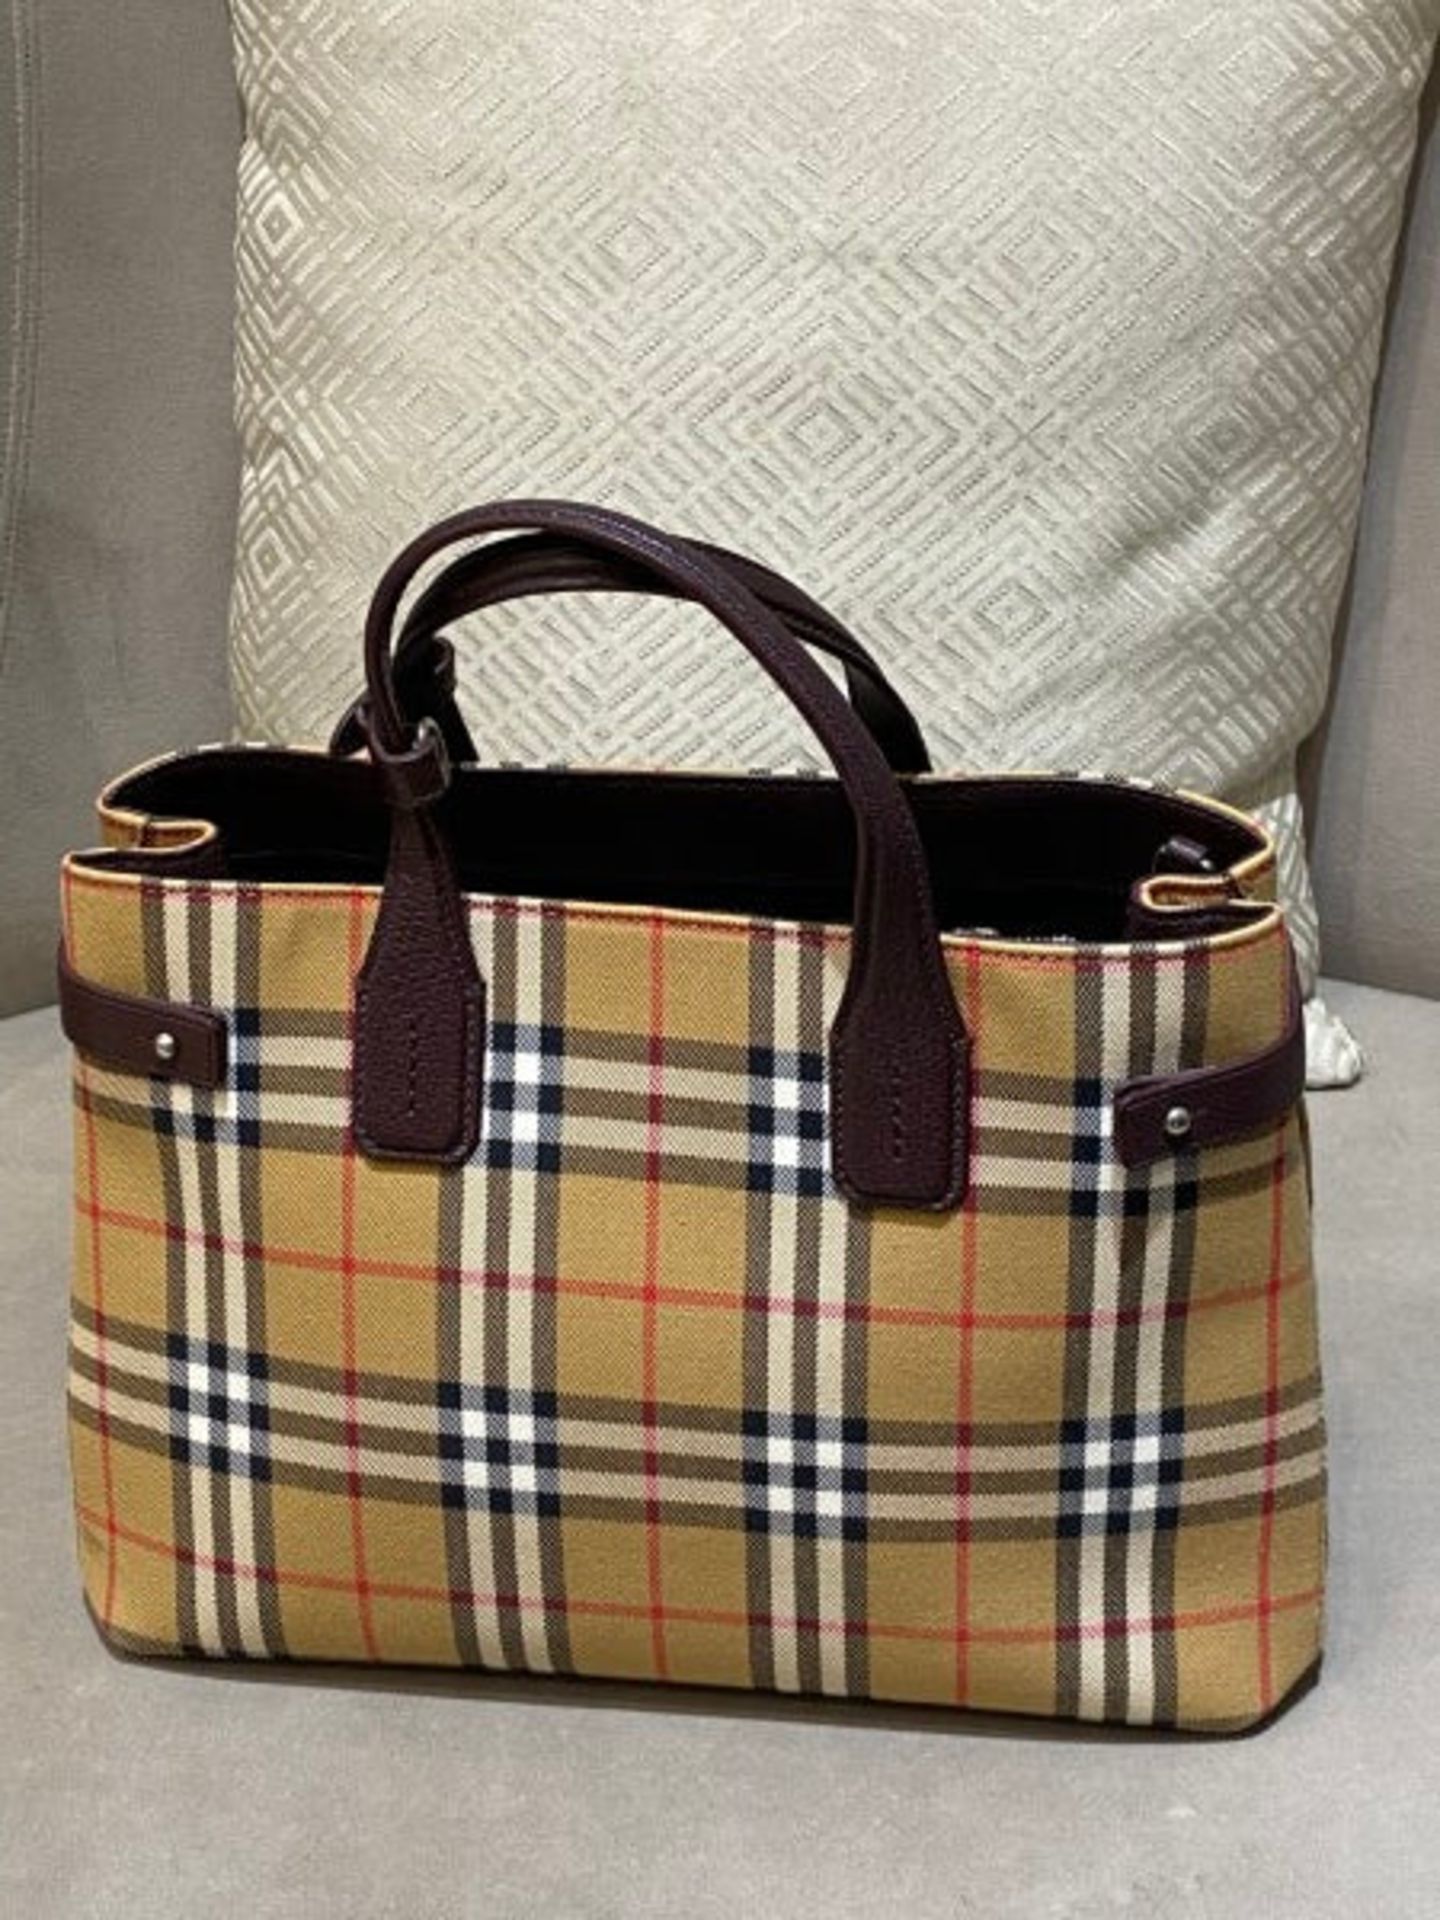 Burberry House Check Banner Tote Bag. 28x20cm. - Image 3 of 8